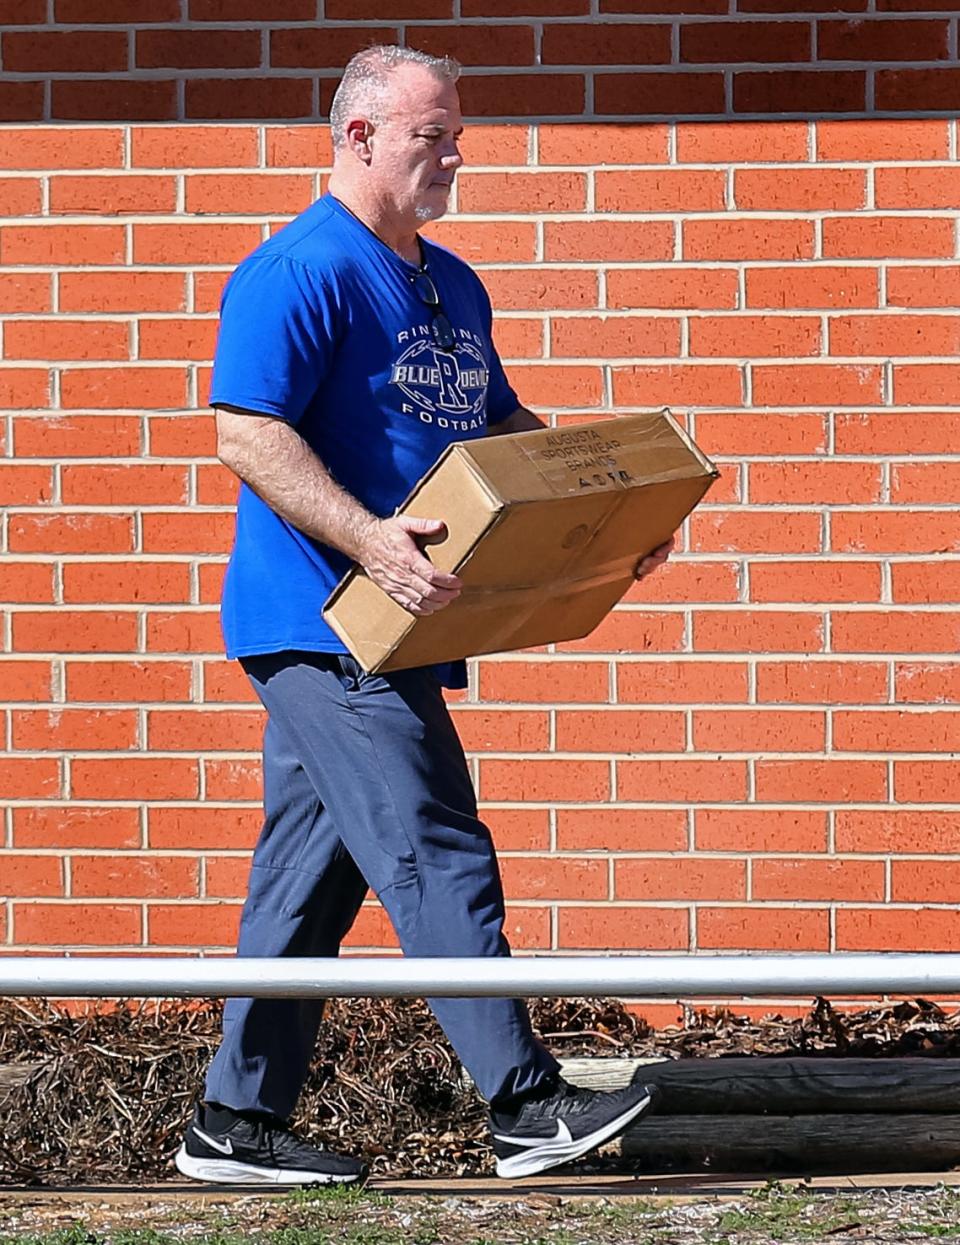 Philip Koons, the Ringling High School football coach and principal, walks out of the Ringling Public Schools superintendent's office to his truck with a box on Wednesday, Feb. 22, 2023 in Ringling, Okla. Koons is currently under OSBI investigation amid accusations of bullying and abuse.